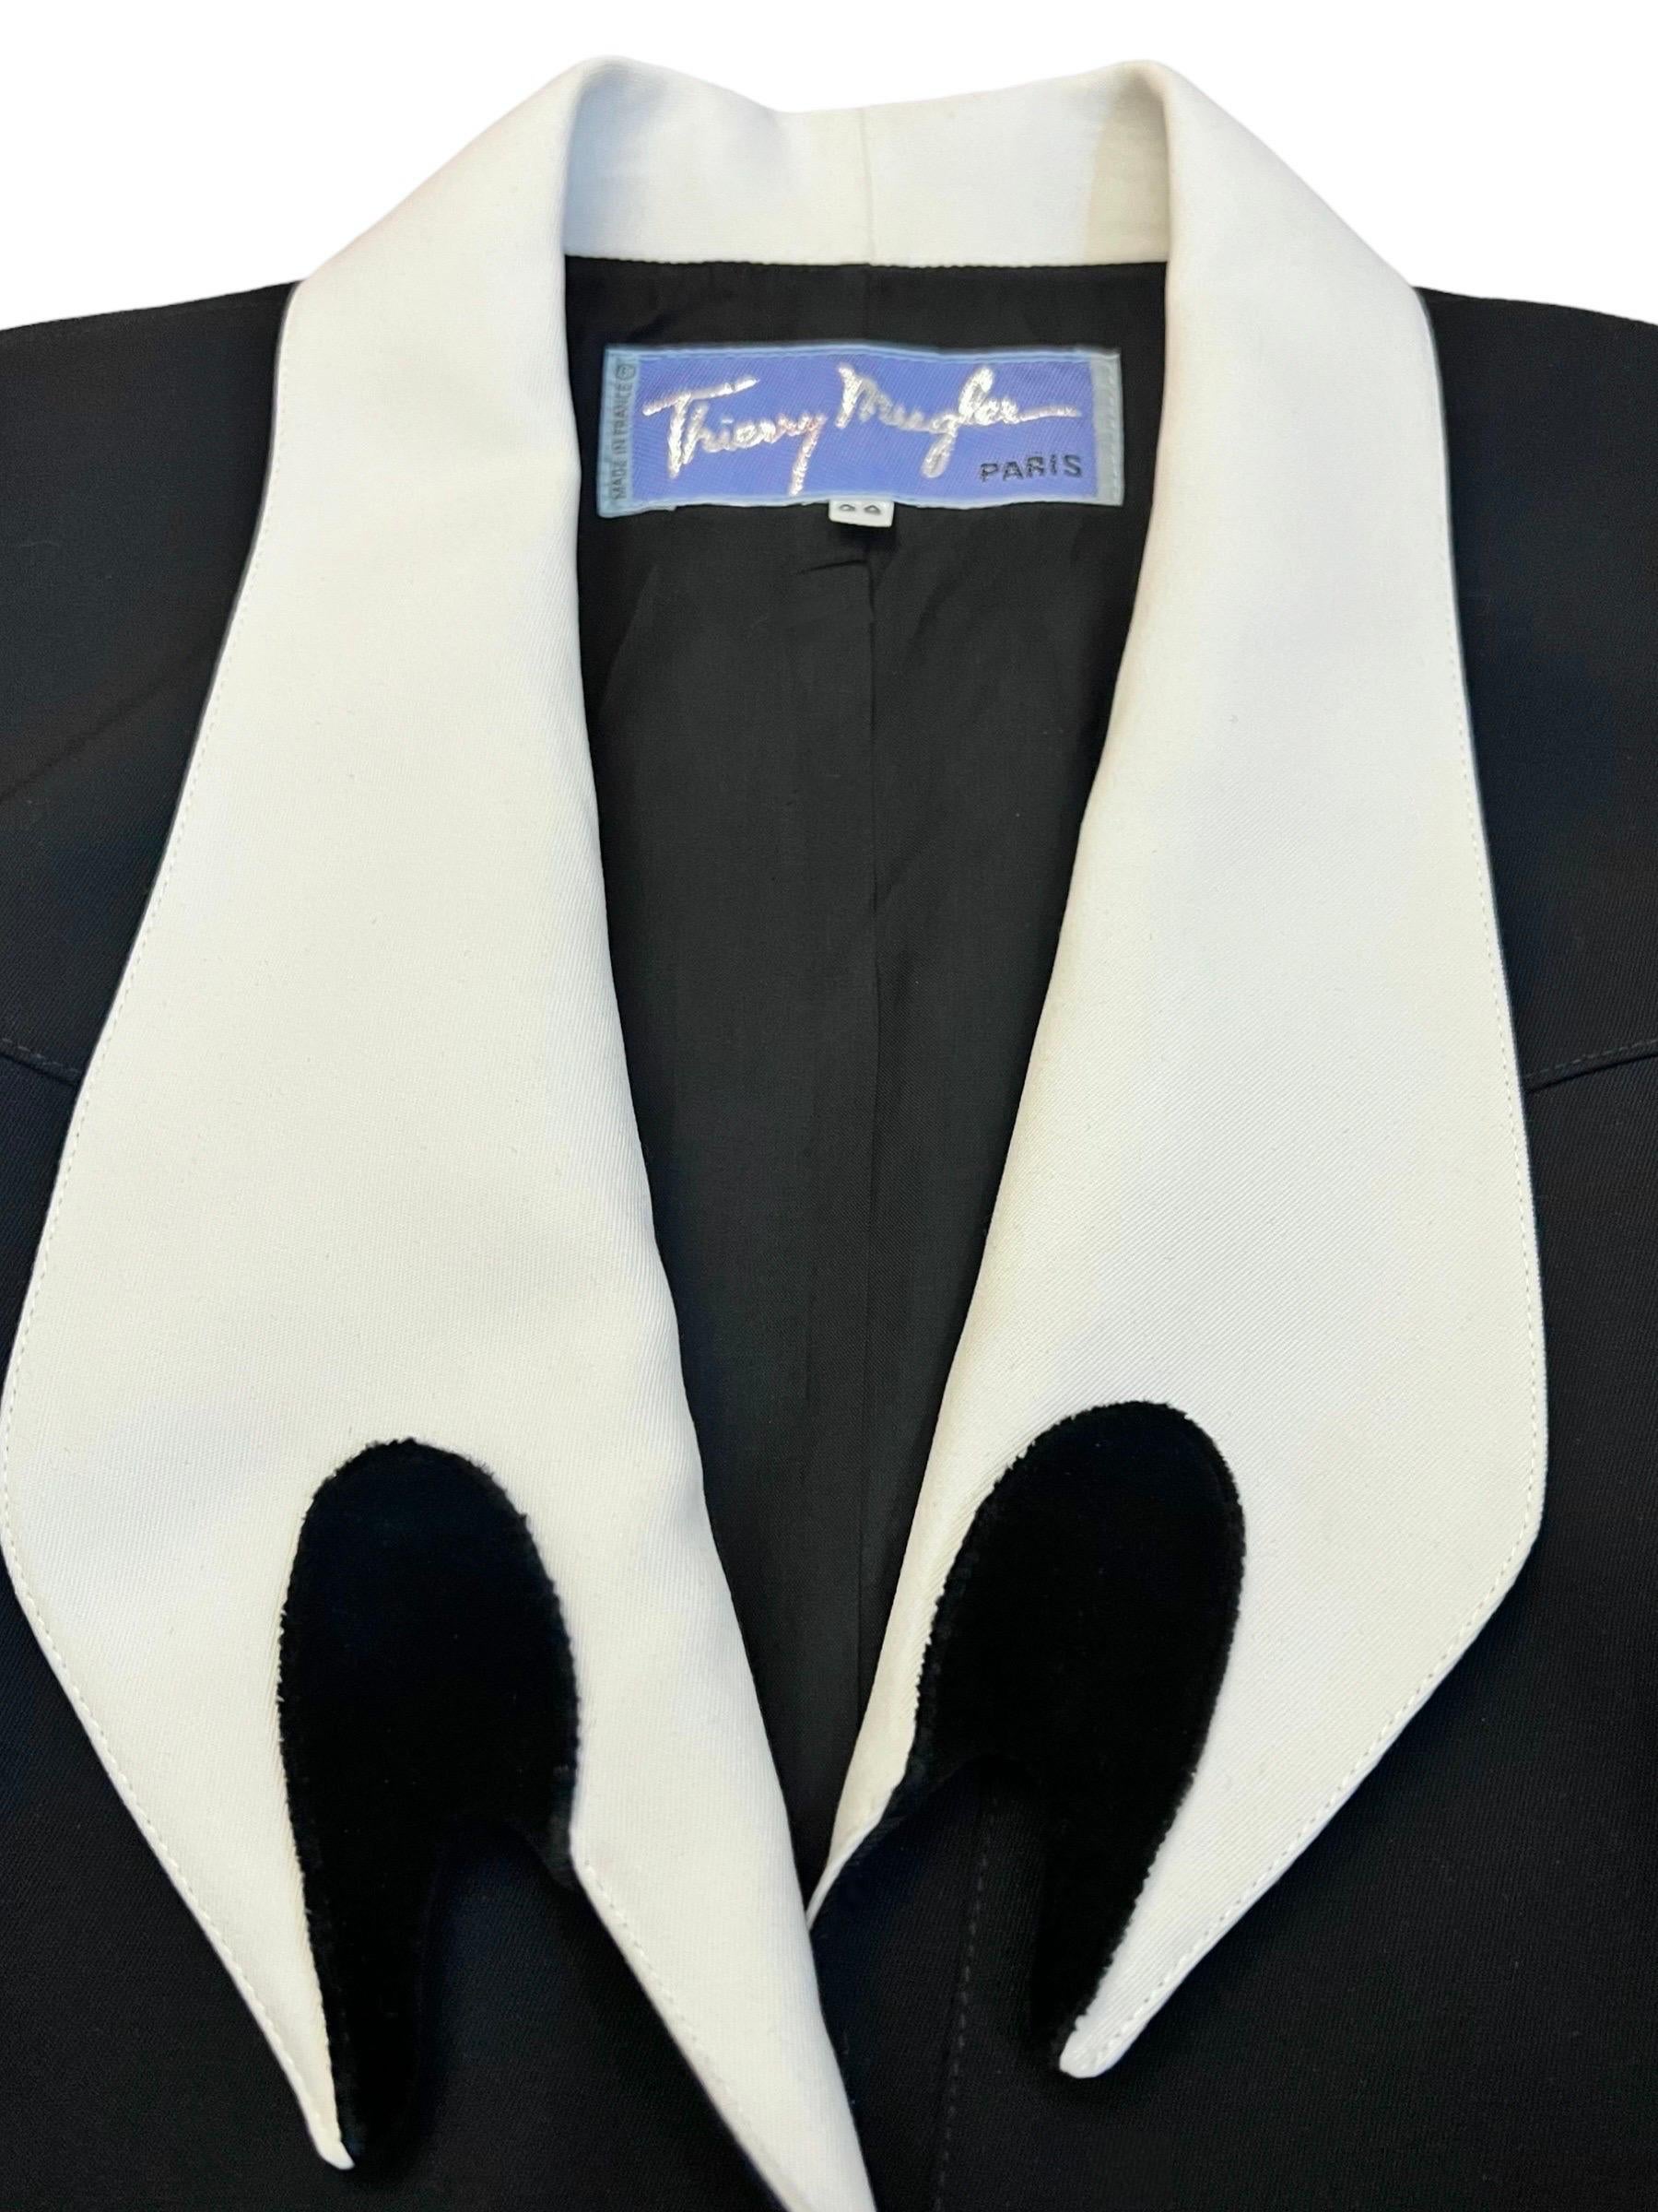 S/S 1992 Thierry Mugler Black Runway Jacket Dramatic White Collar For Sale 6